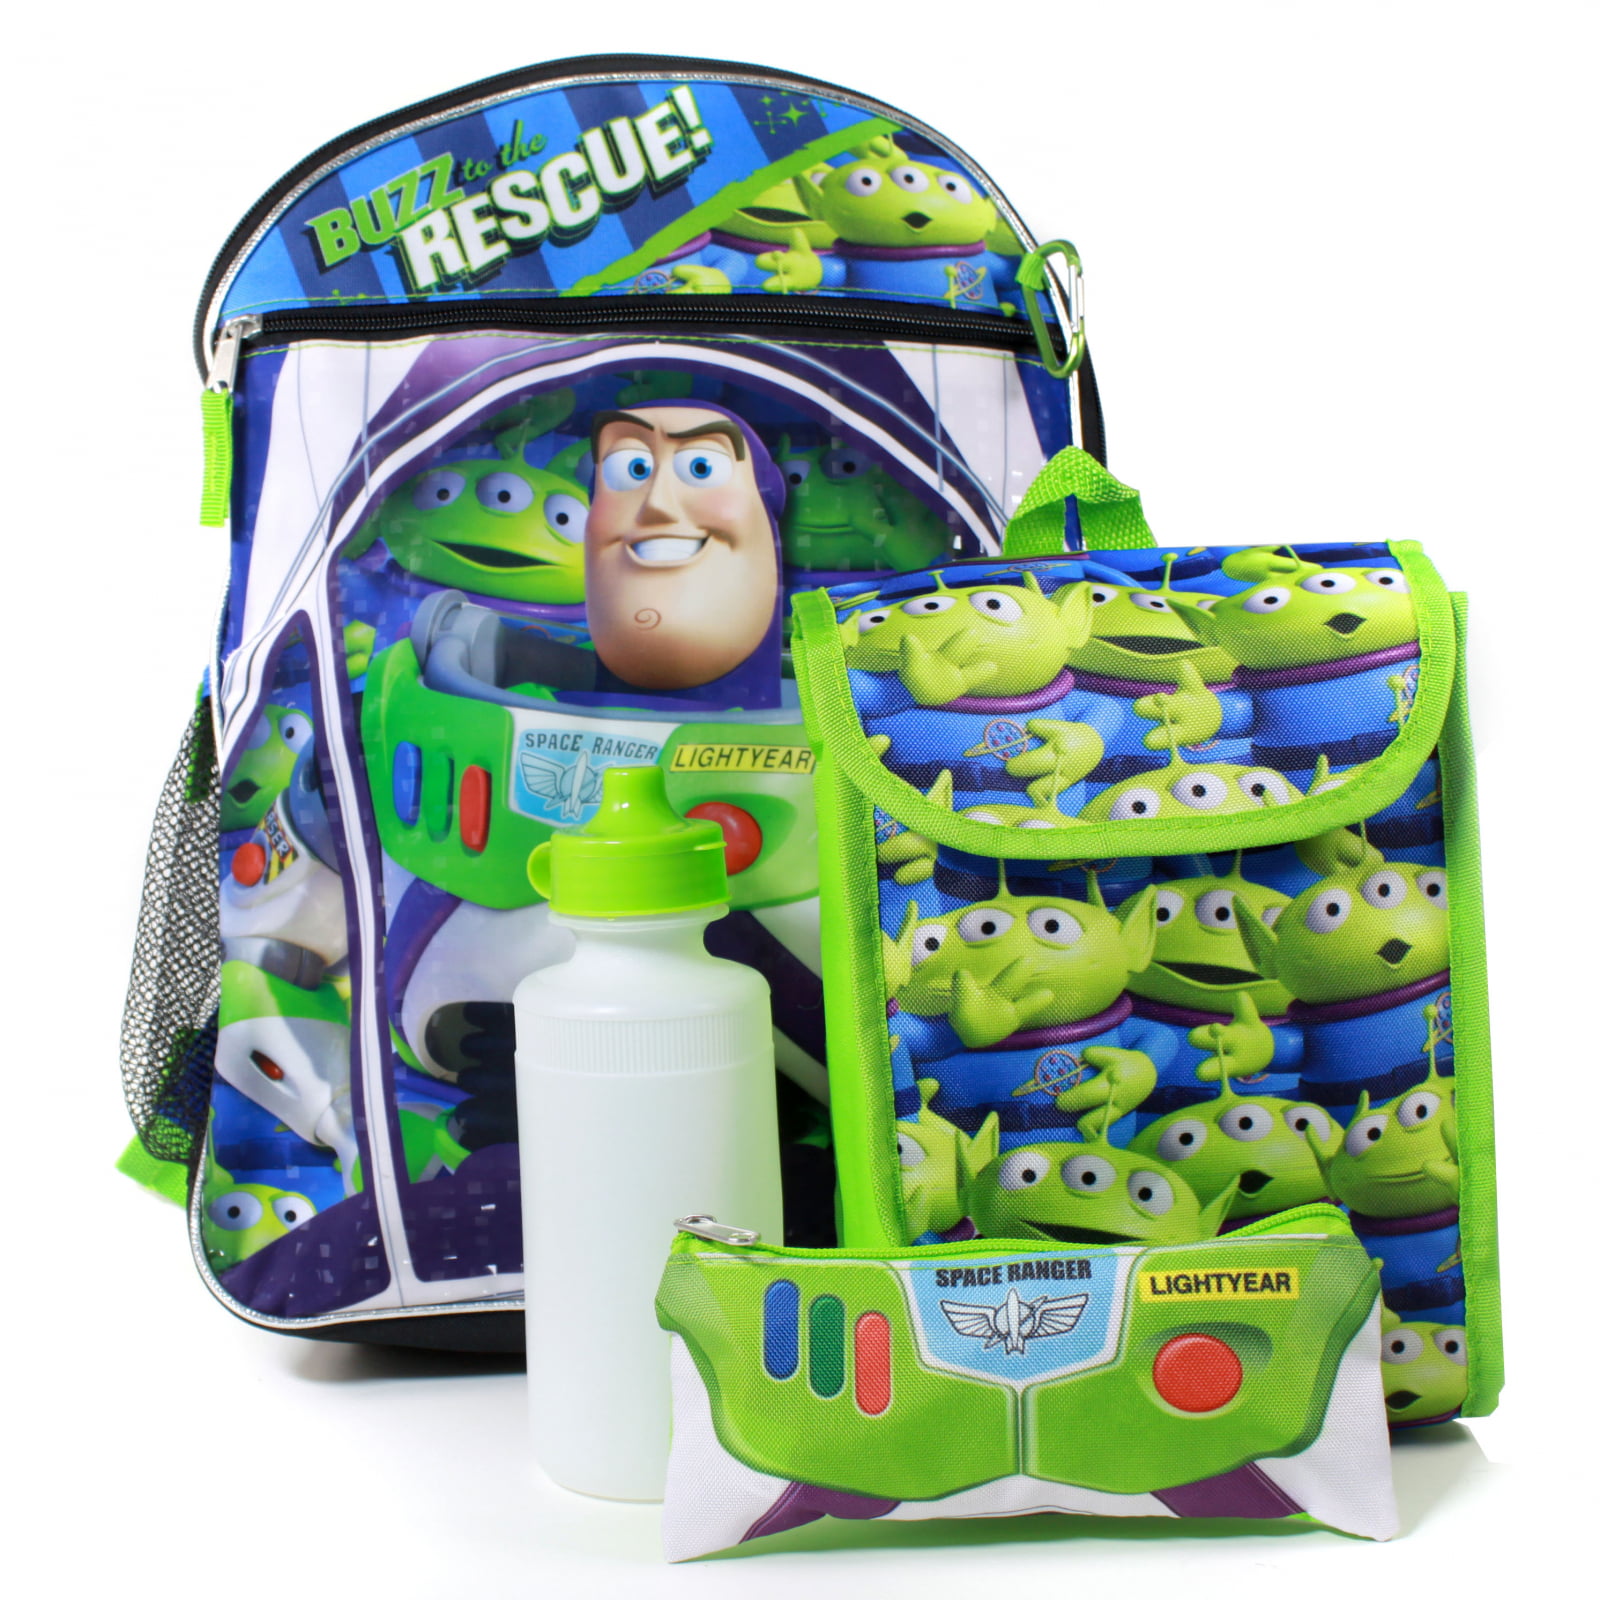 Toy Story Buzz Lightyear rucksack green Bag Backpack limited Japan Disney